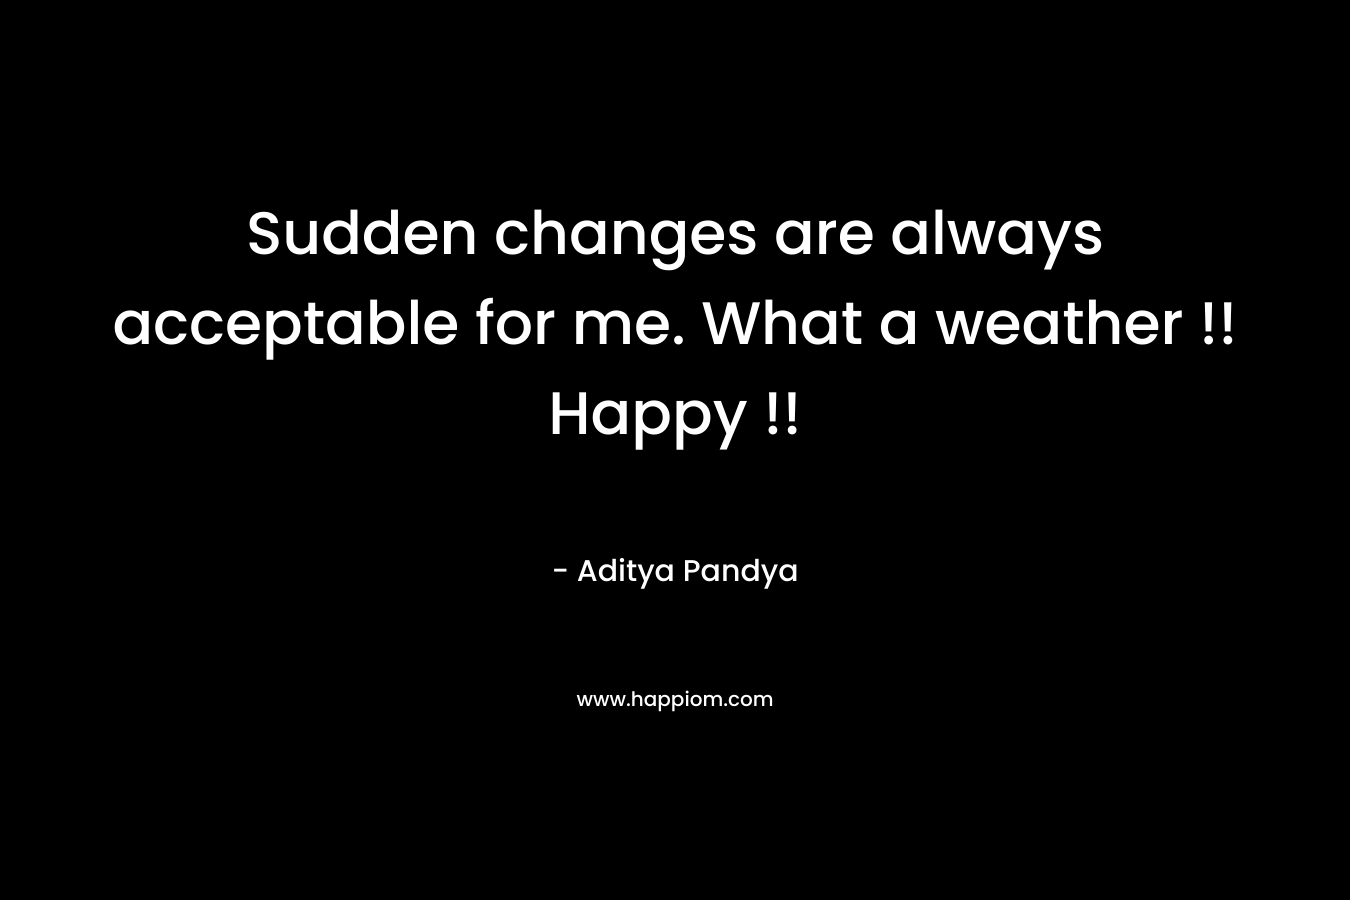 Sudden changes are always acceptable for me. What a weather !! Happy !!